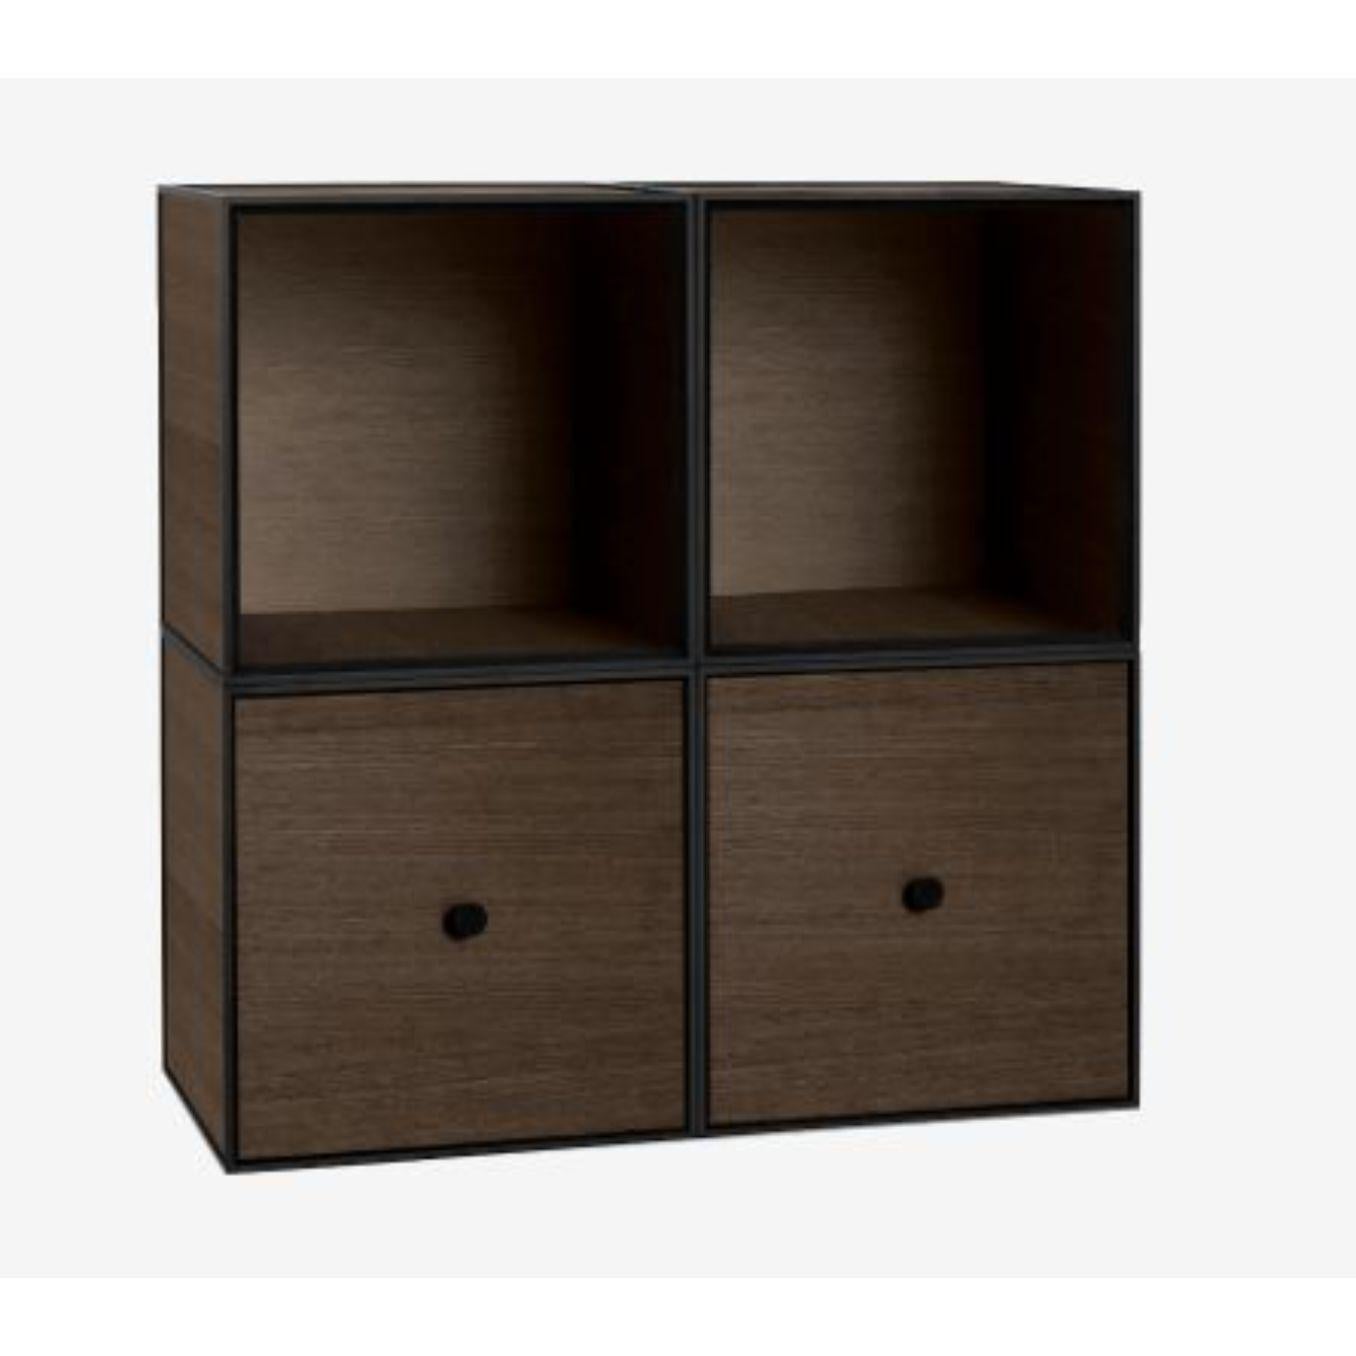 35 smoked oak frame square standard box by Lassen
Dimensions: D 70 x W 35 x H 70 cm 
Materials: Finér, Melamin, Melamine, Metal, Veneer, Oak
Also available in different colours and dimensions.
Weight: 23.74 Kg

By Lassen is a Danish design